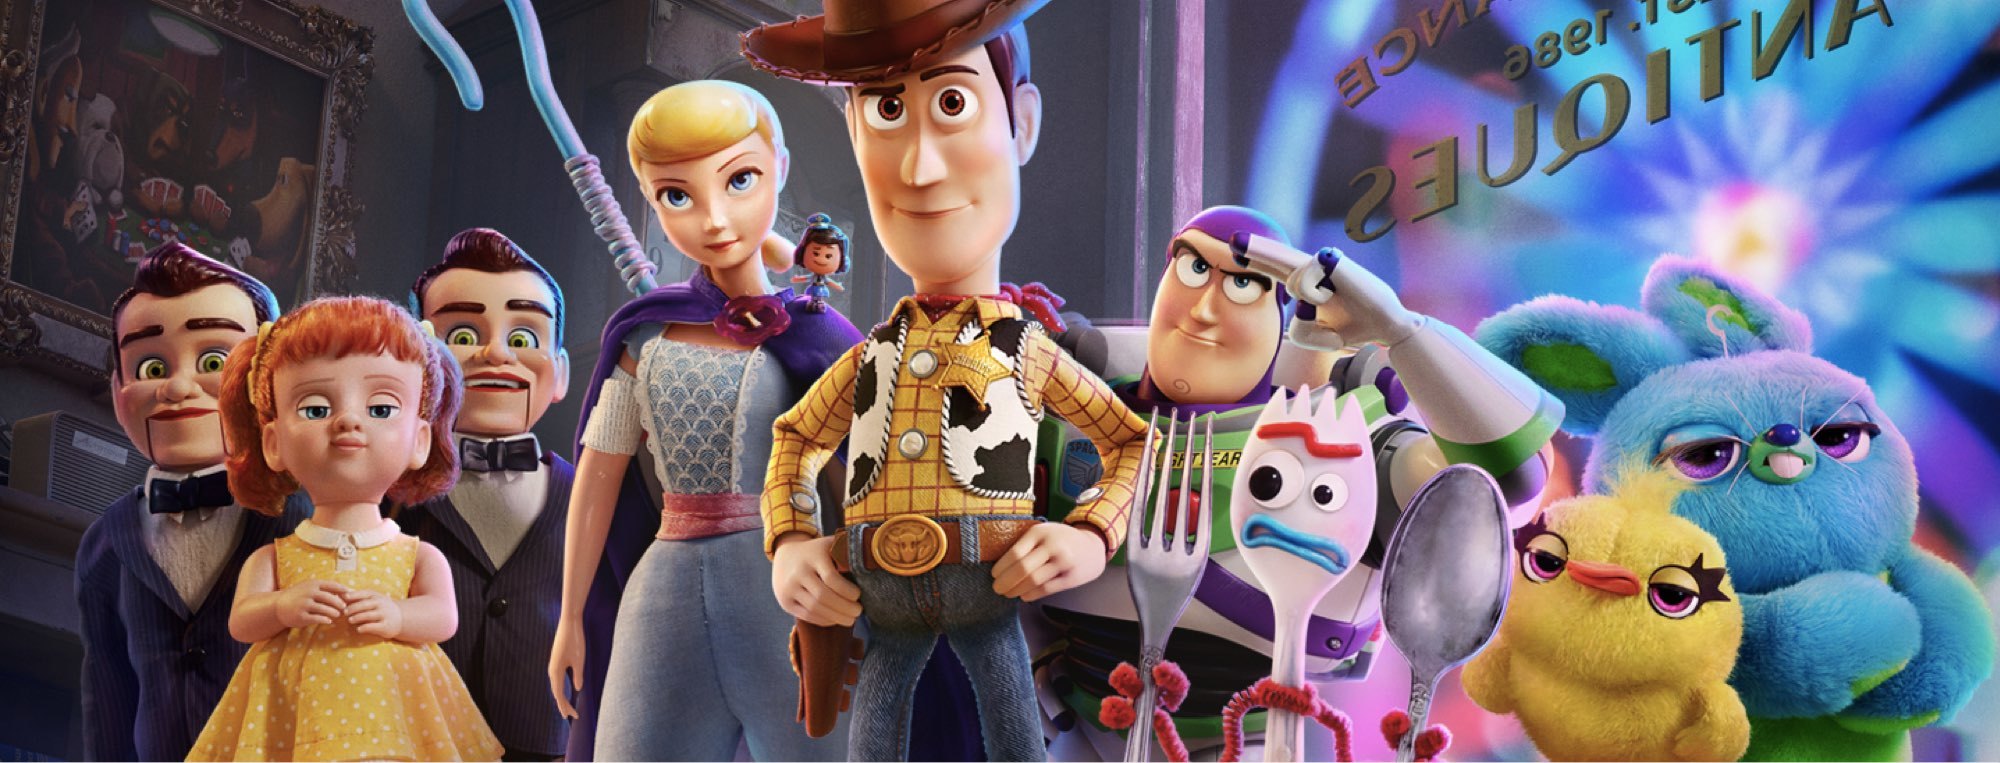 Toy Story 4 instal the new for windows